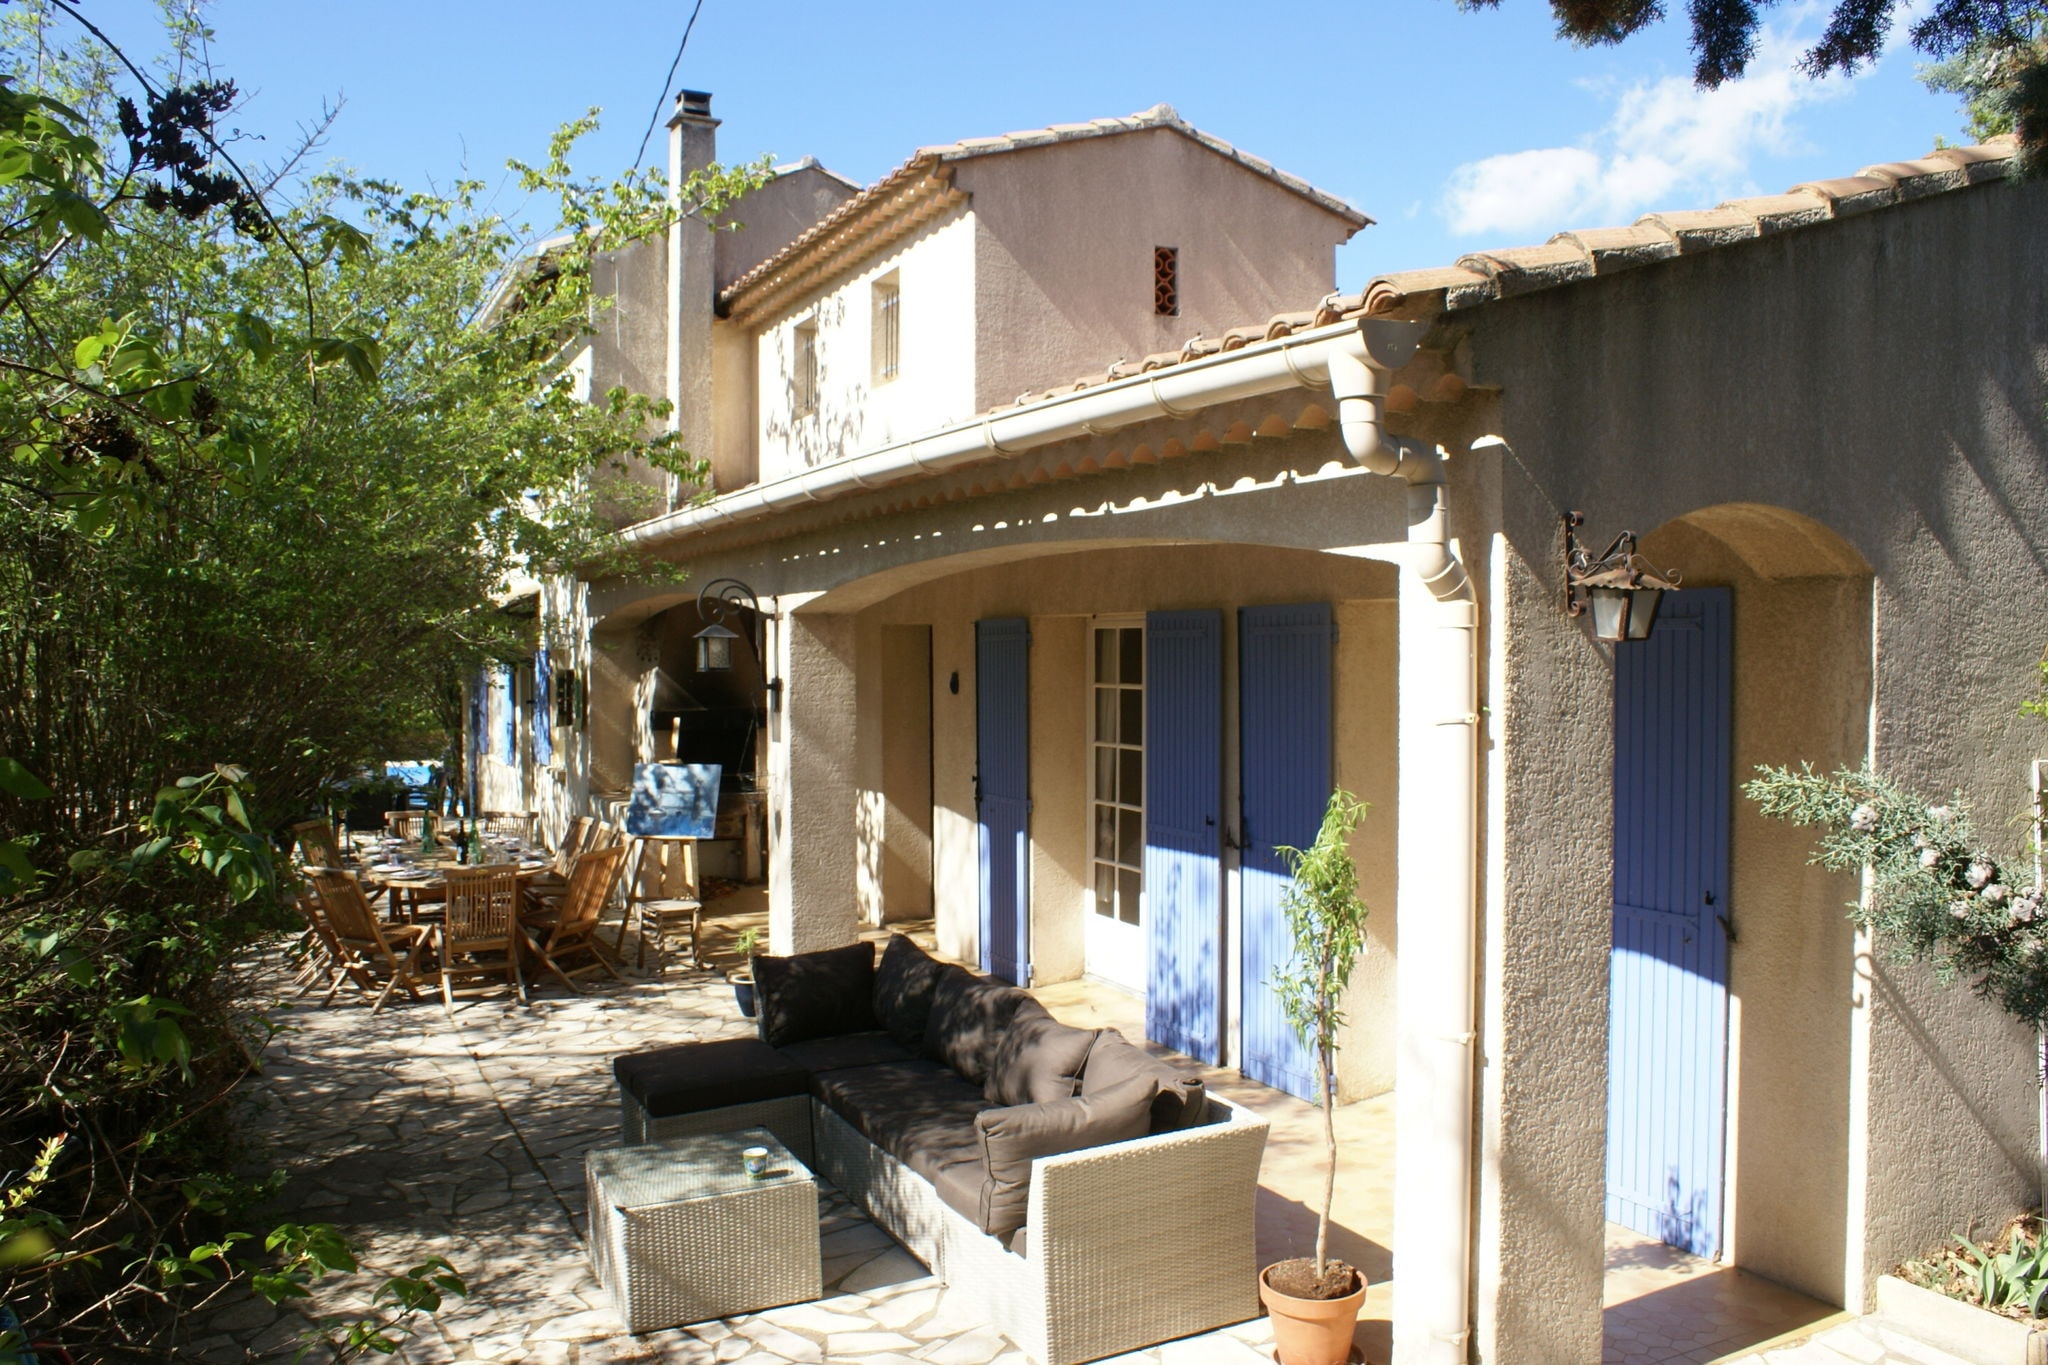 Child-friendly, detached villa with private swimming pool